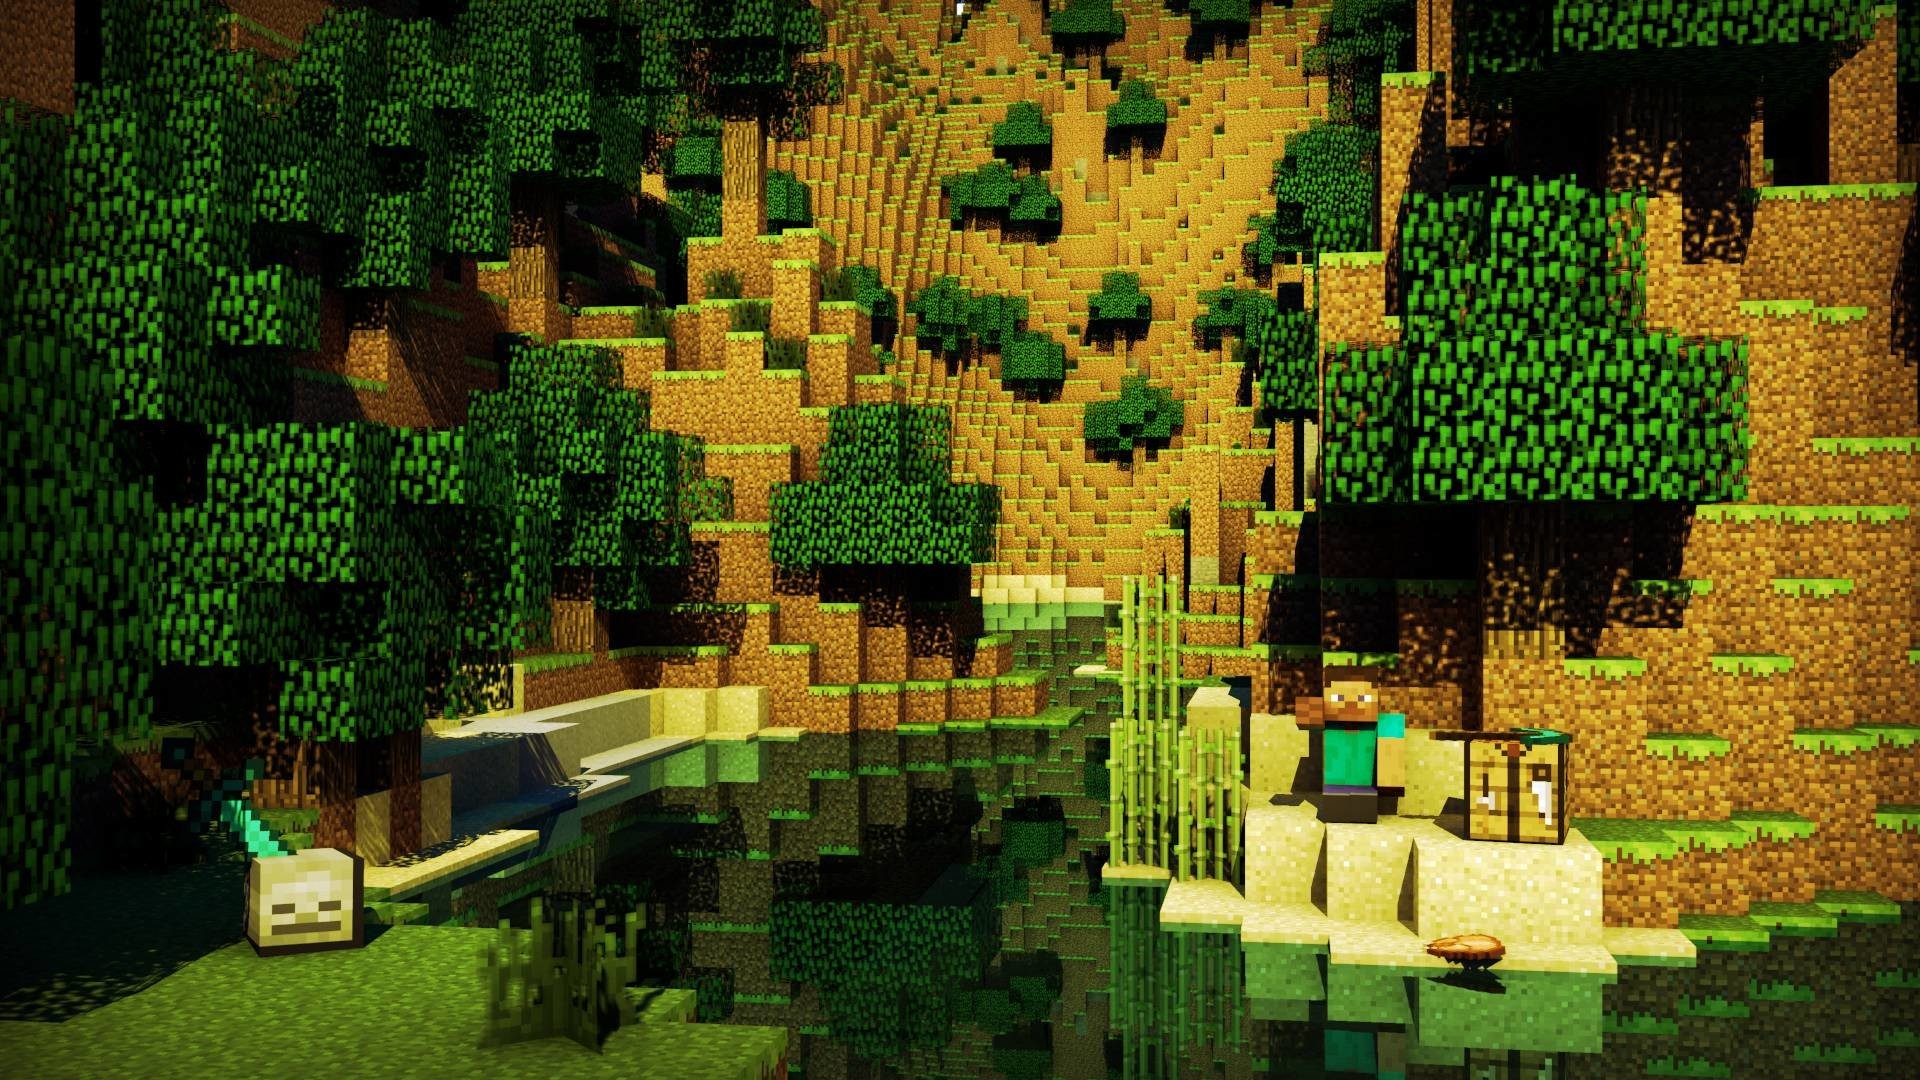 1920x1080 Images For Gt Cool Minecraft Background Hd 1920x1080